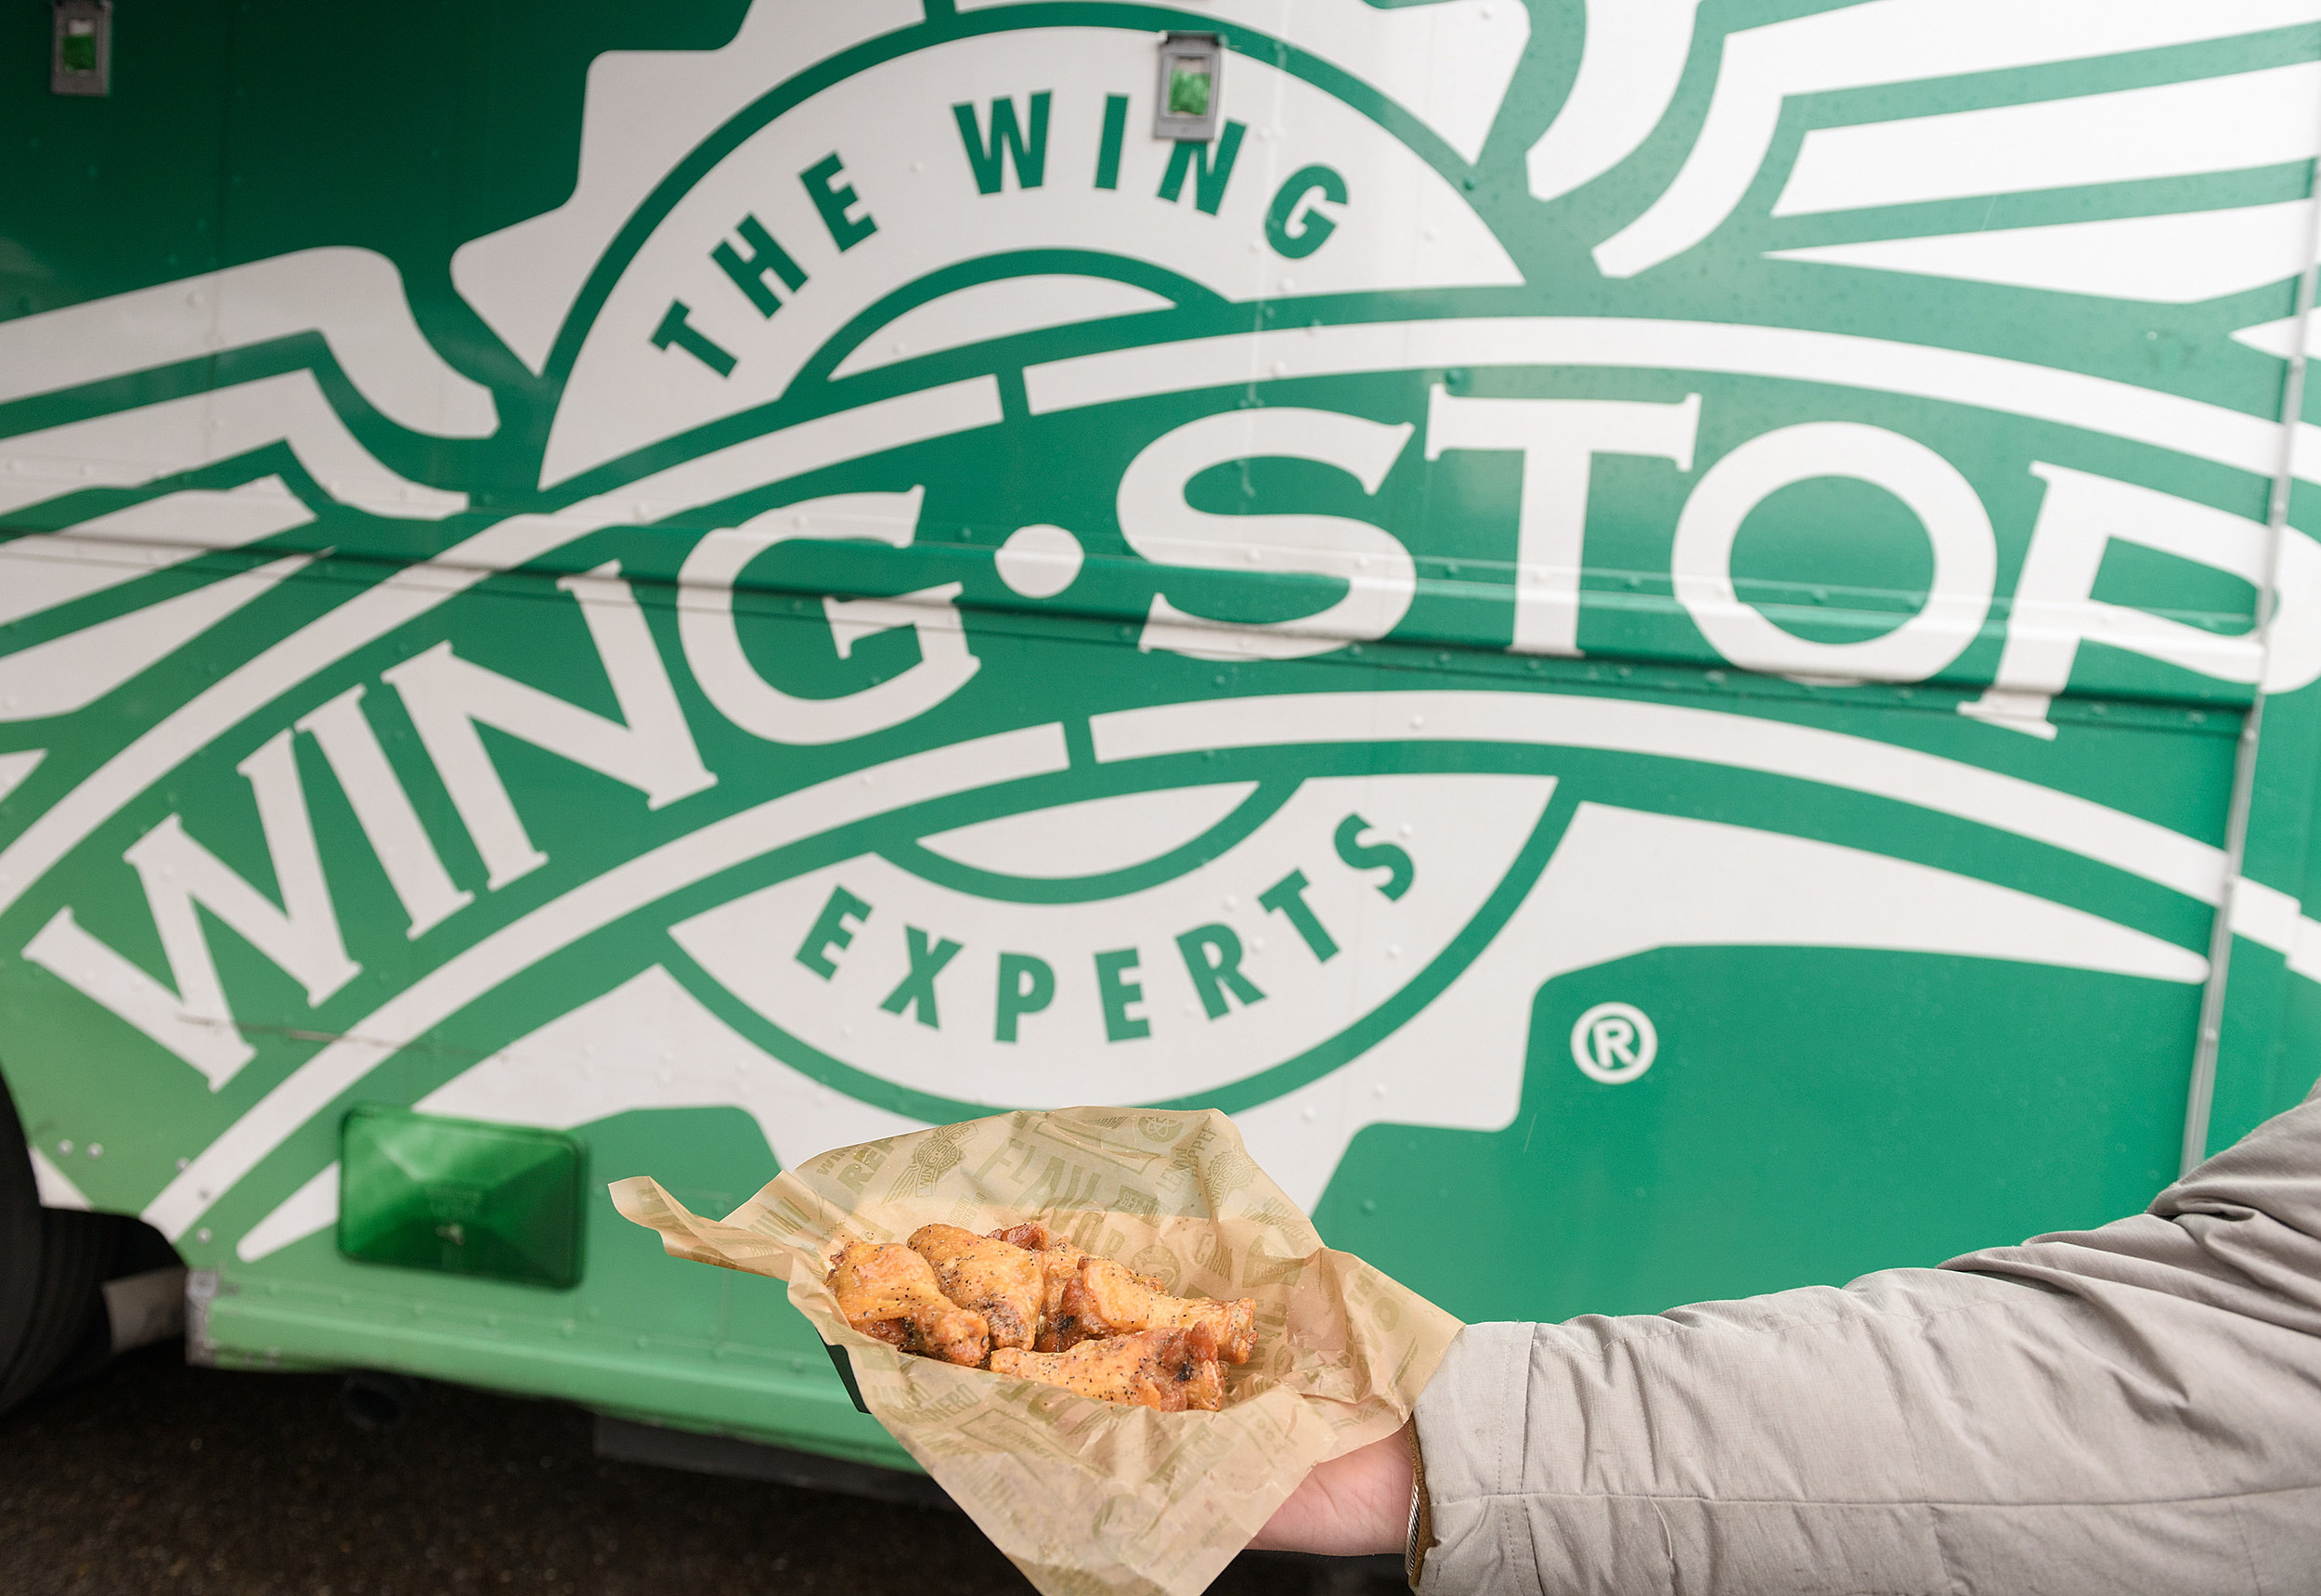 Former Wingstop CEO Looks to Turn Salad and Go into Category